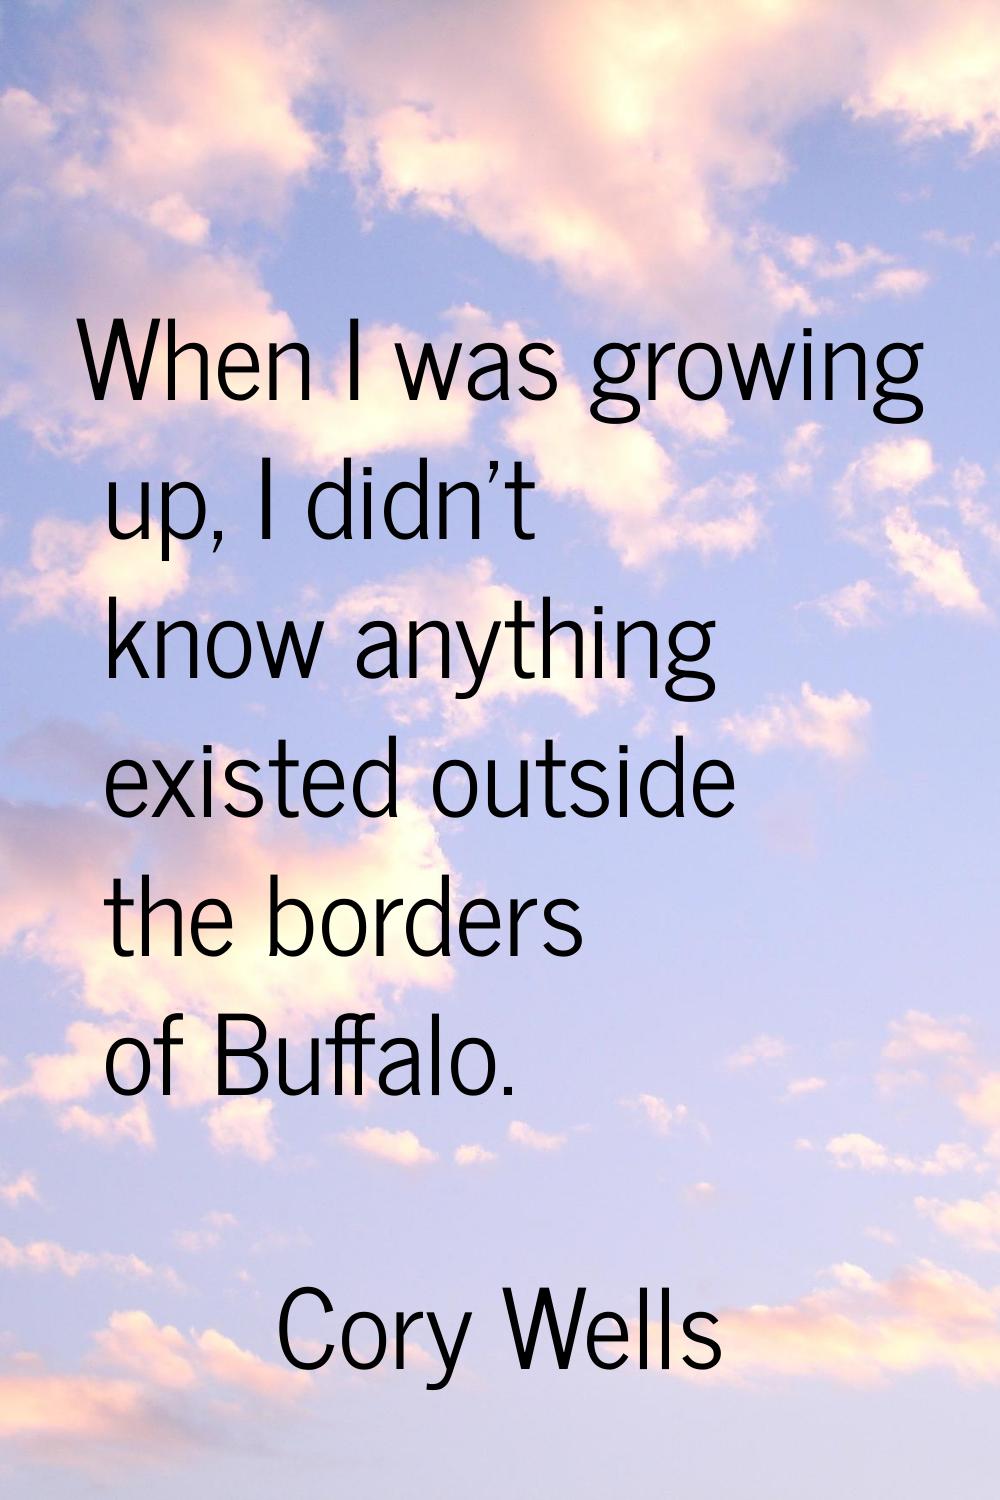 When I was growing up, I didn't know anything existed outside the borders of Buffalo.